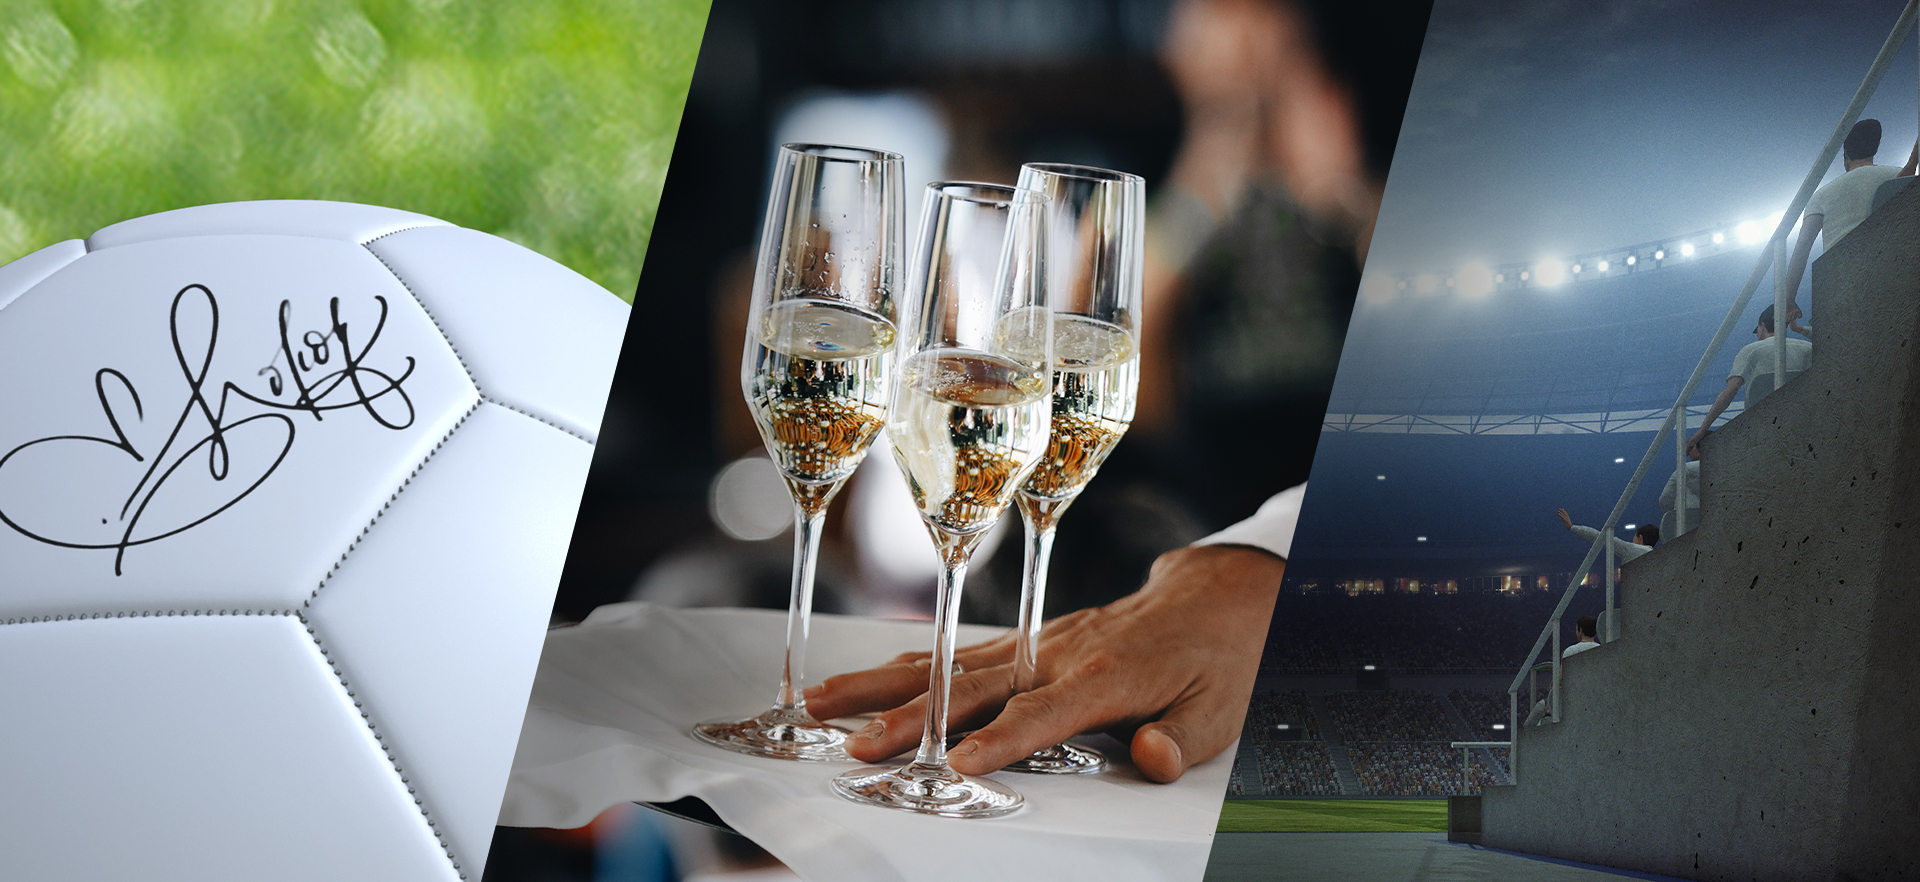 Composite image of signed football, champagne glasses and stadium